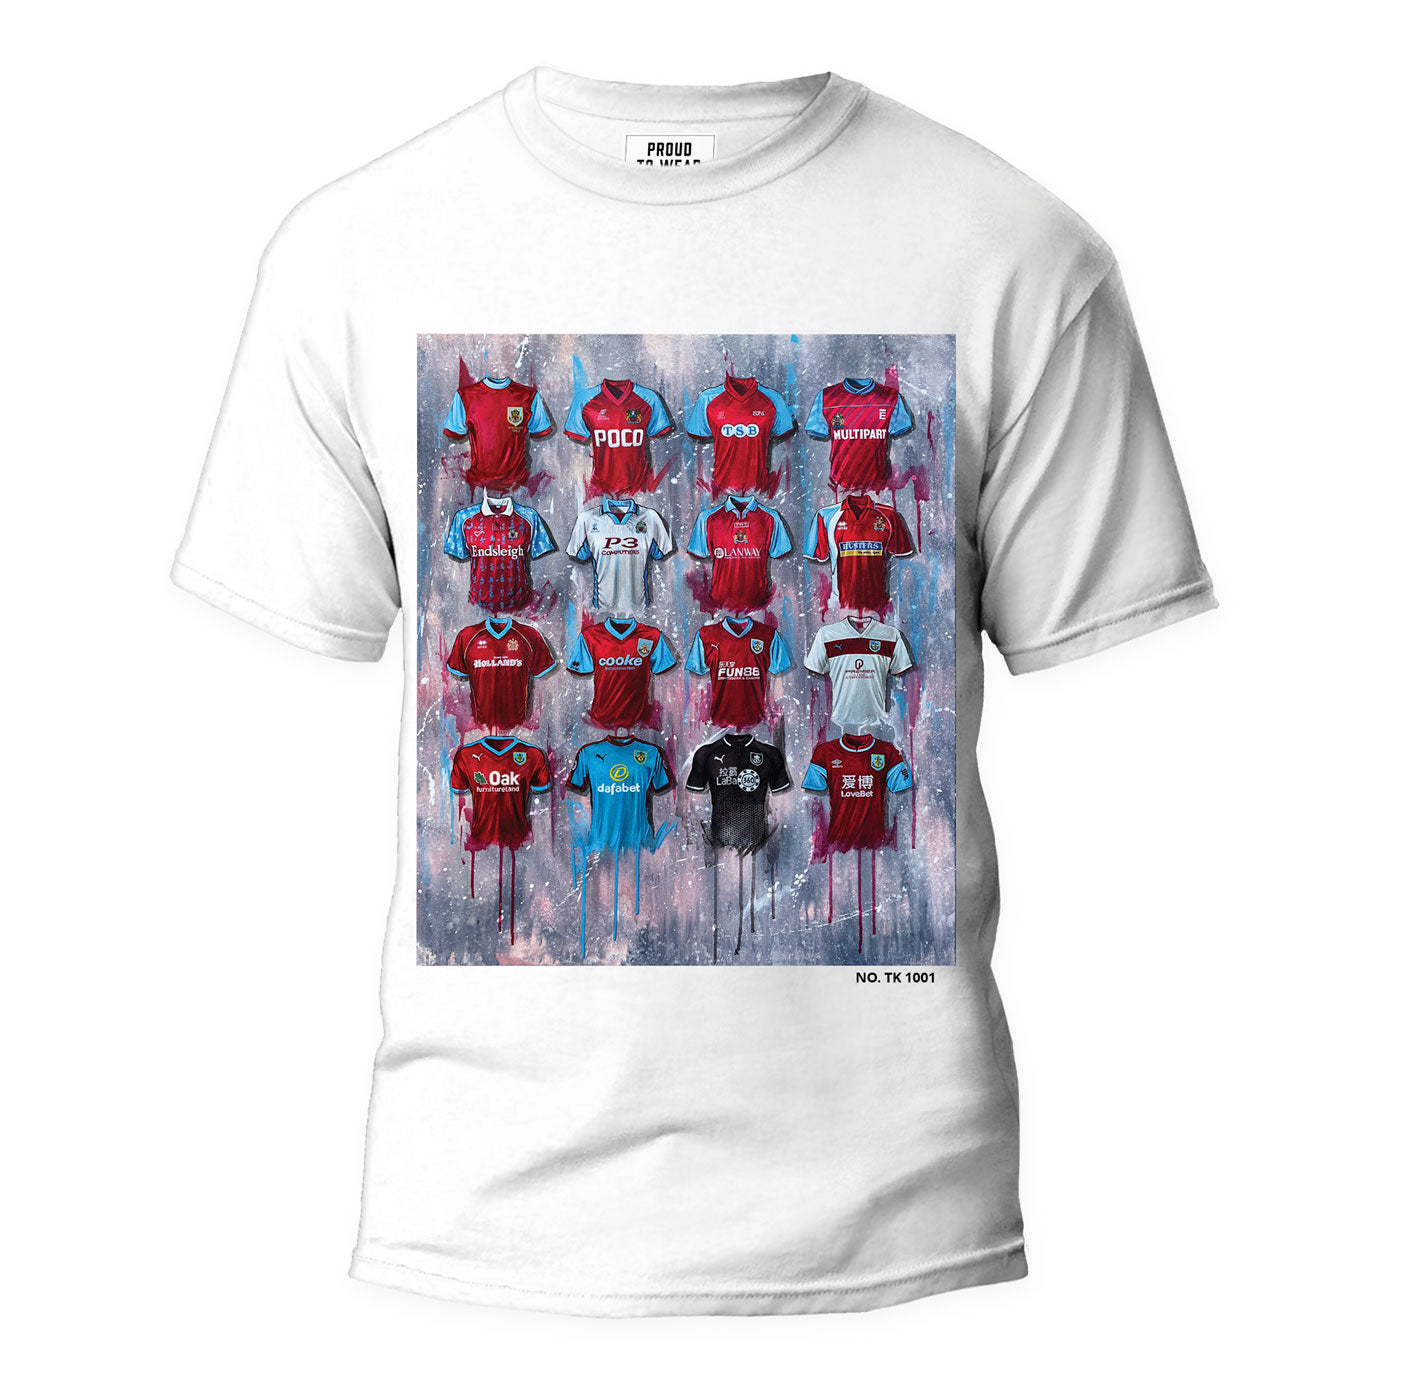 These one-of-a-kind Burnley T-shirts from artist Terry Kneeshaw showcase his unique artwork of the team, and each T-shirt is individually numbered for exclusivity. The T-shirts come in a range of sizes from xxs to xxxl and are available in black or white. Made with high-quality materials, they are comfortable and stylish, perfect for any Burnley fan looking to show off their team spirit in a distinctive way.